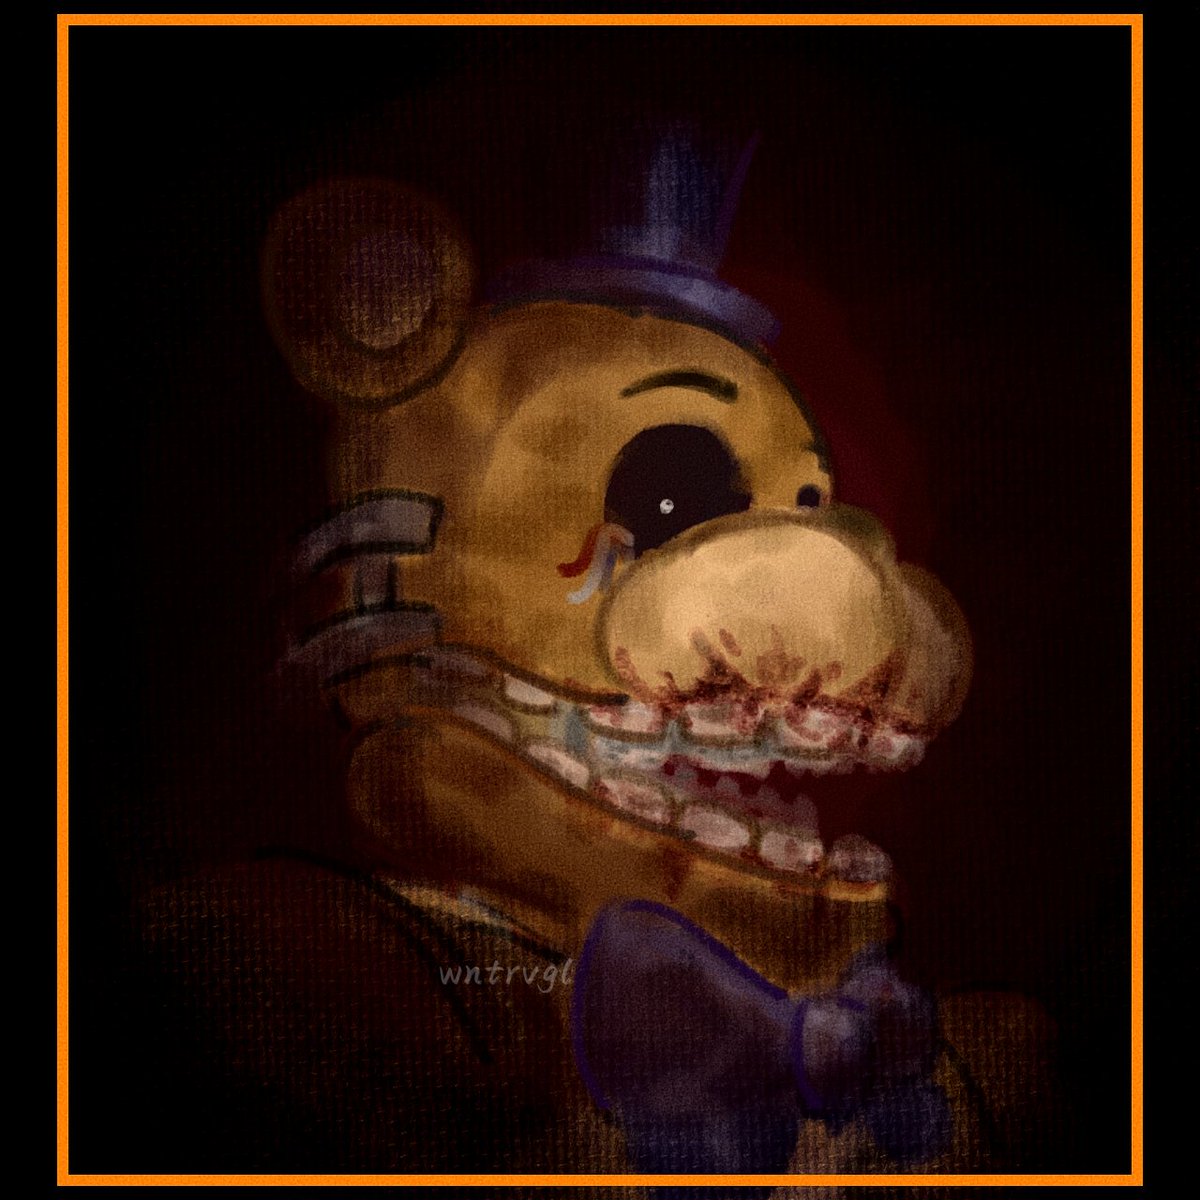 The Bite of 83...

Sorry if I had to reupload, I'm just so proud of this one
#FNAF #fnaffanart #FiveNightsAtFreddys #fredbear #fnaf4